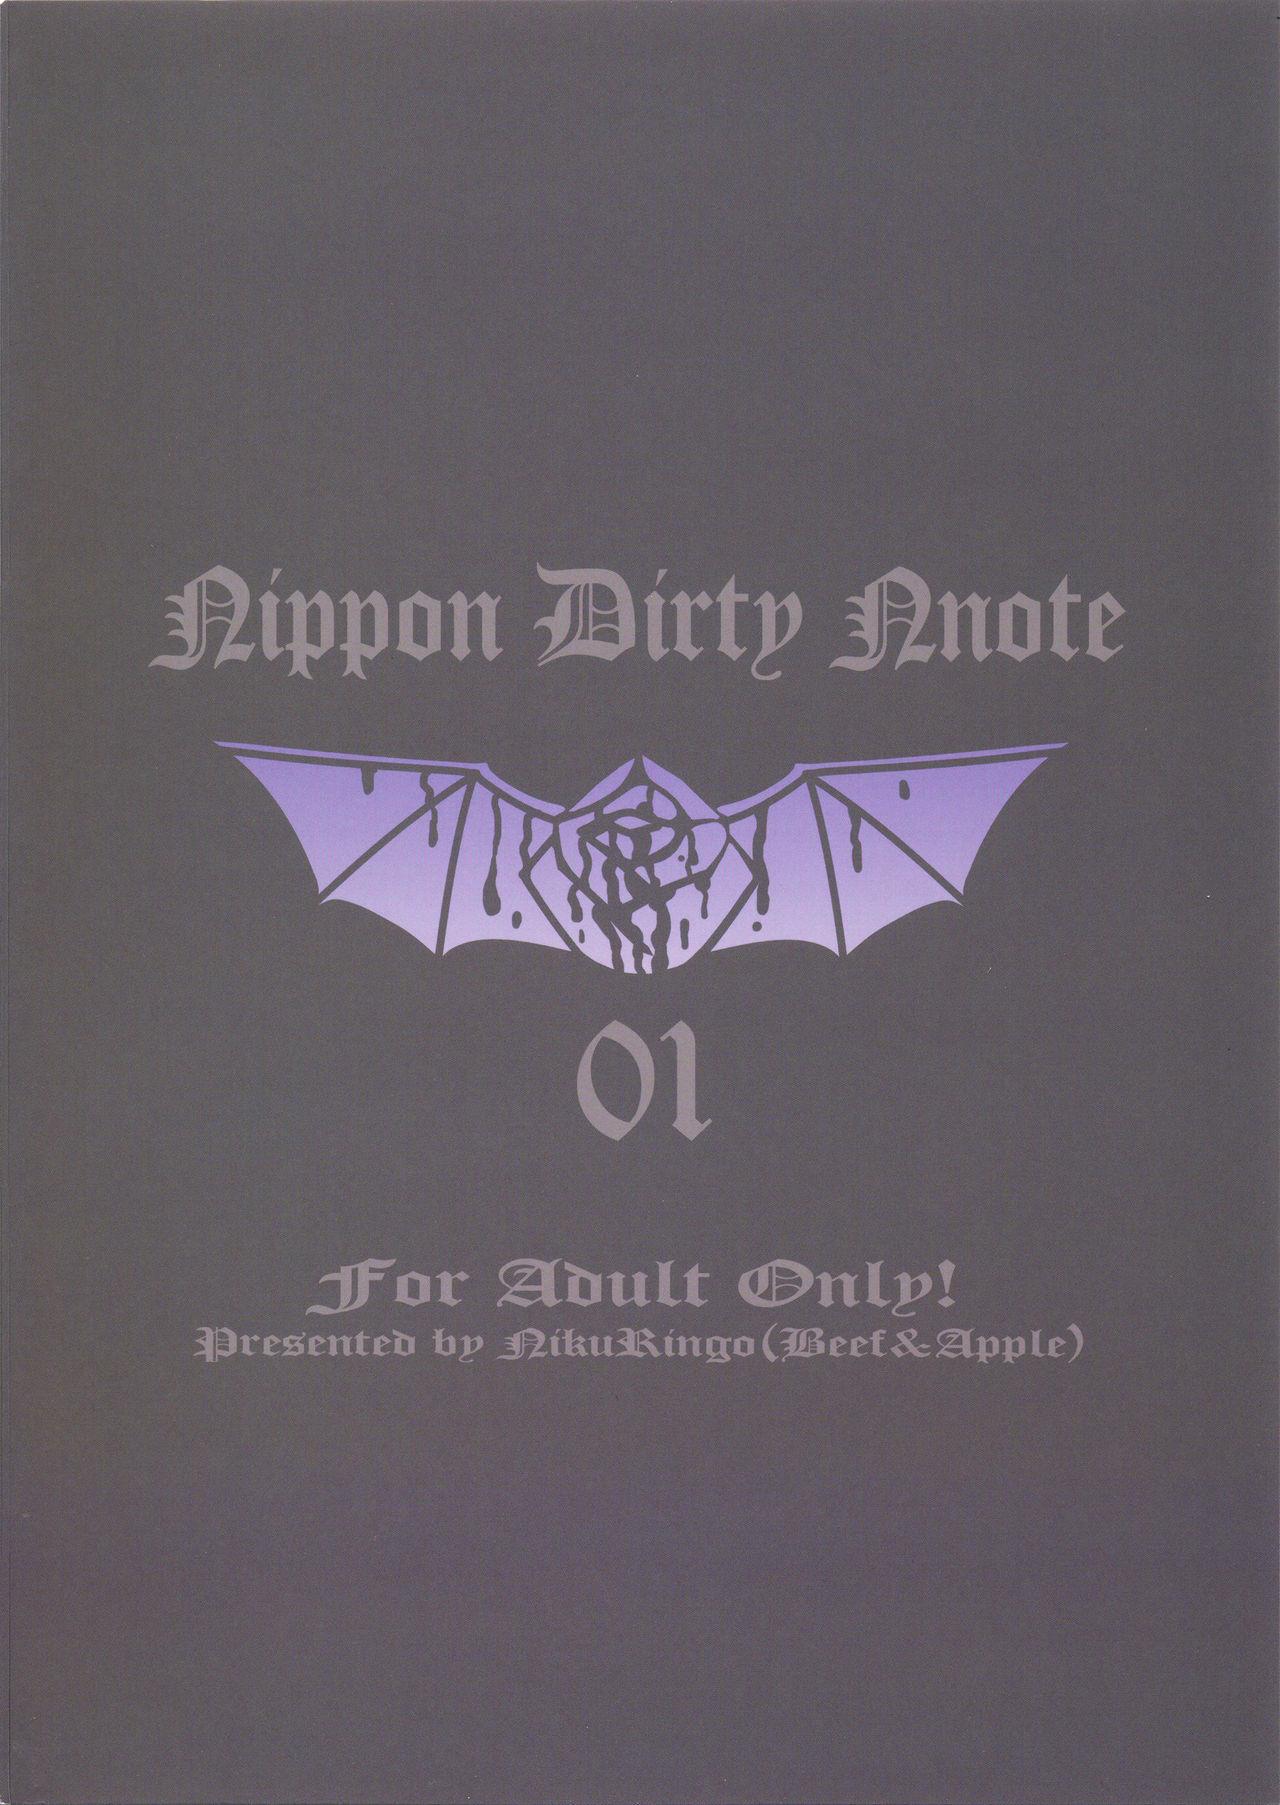 NIPPON DIRTY NOTE 01 21